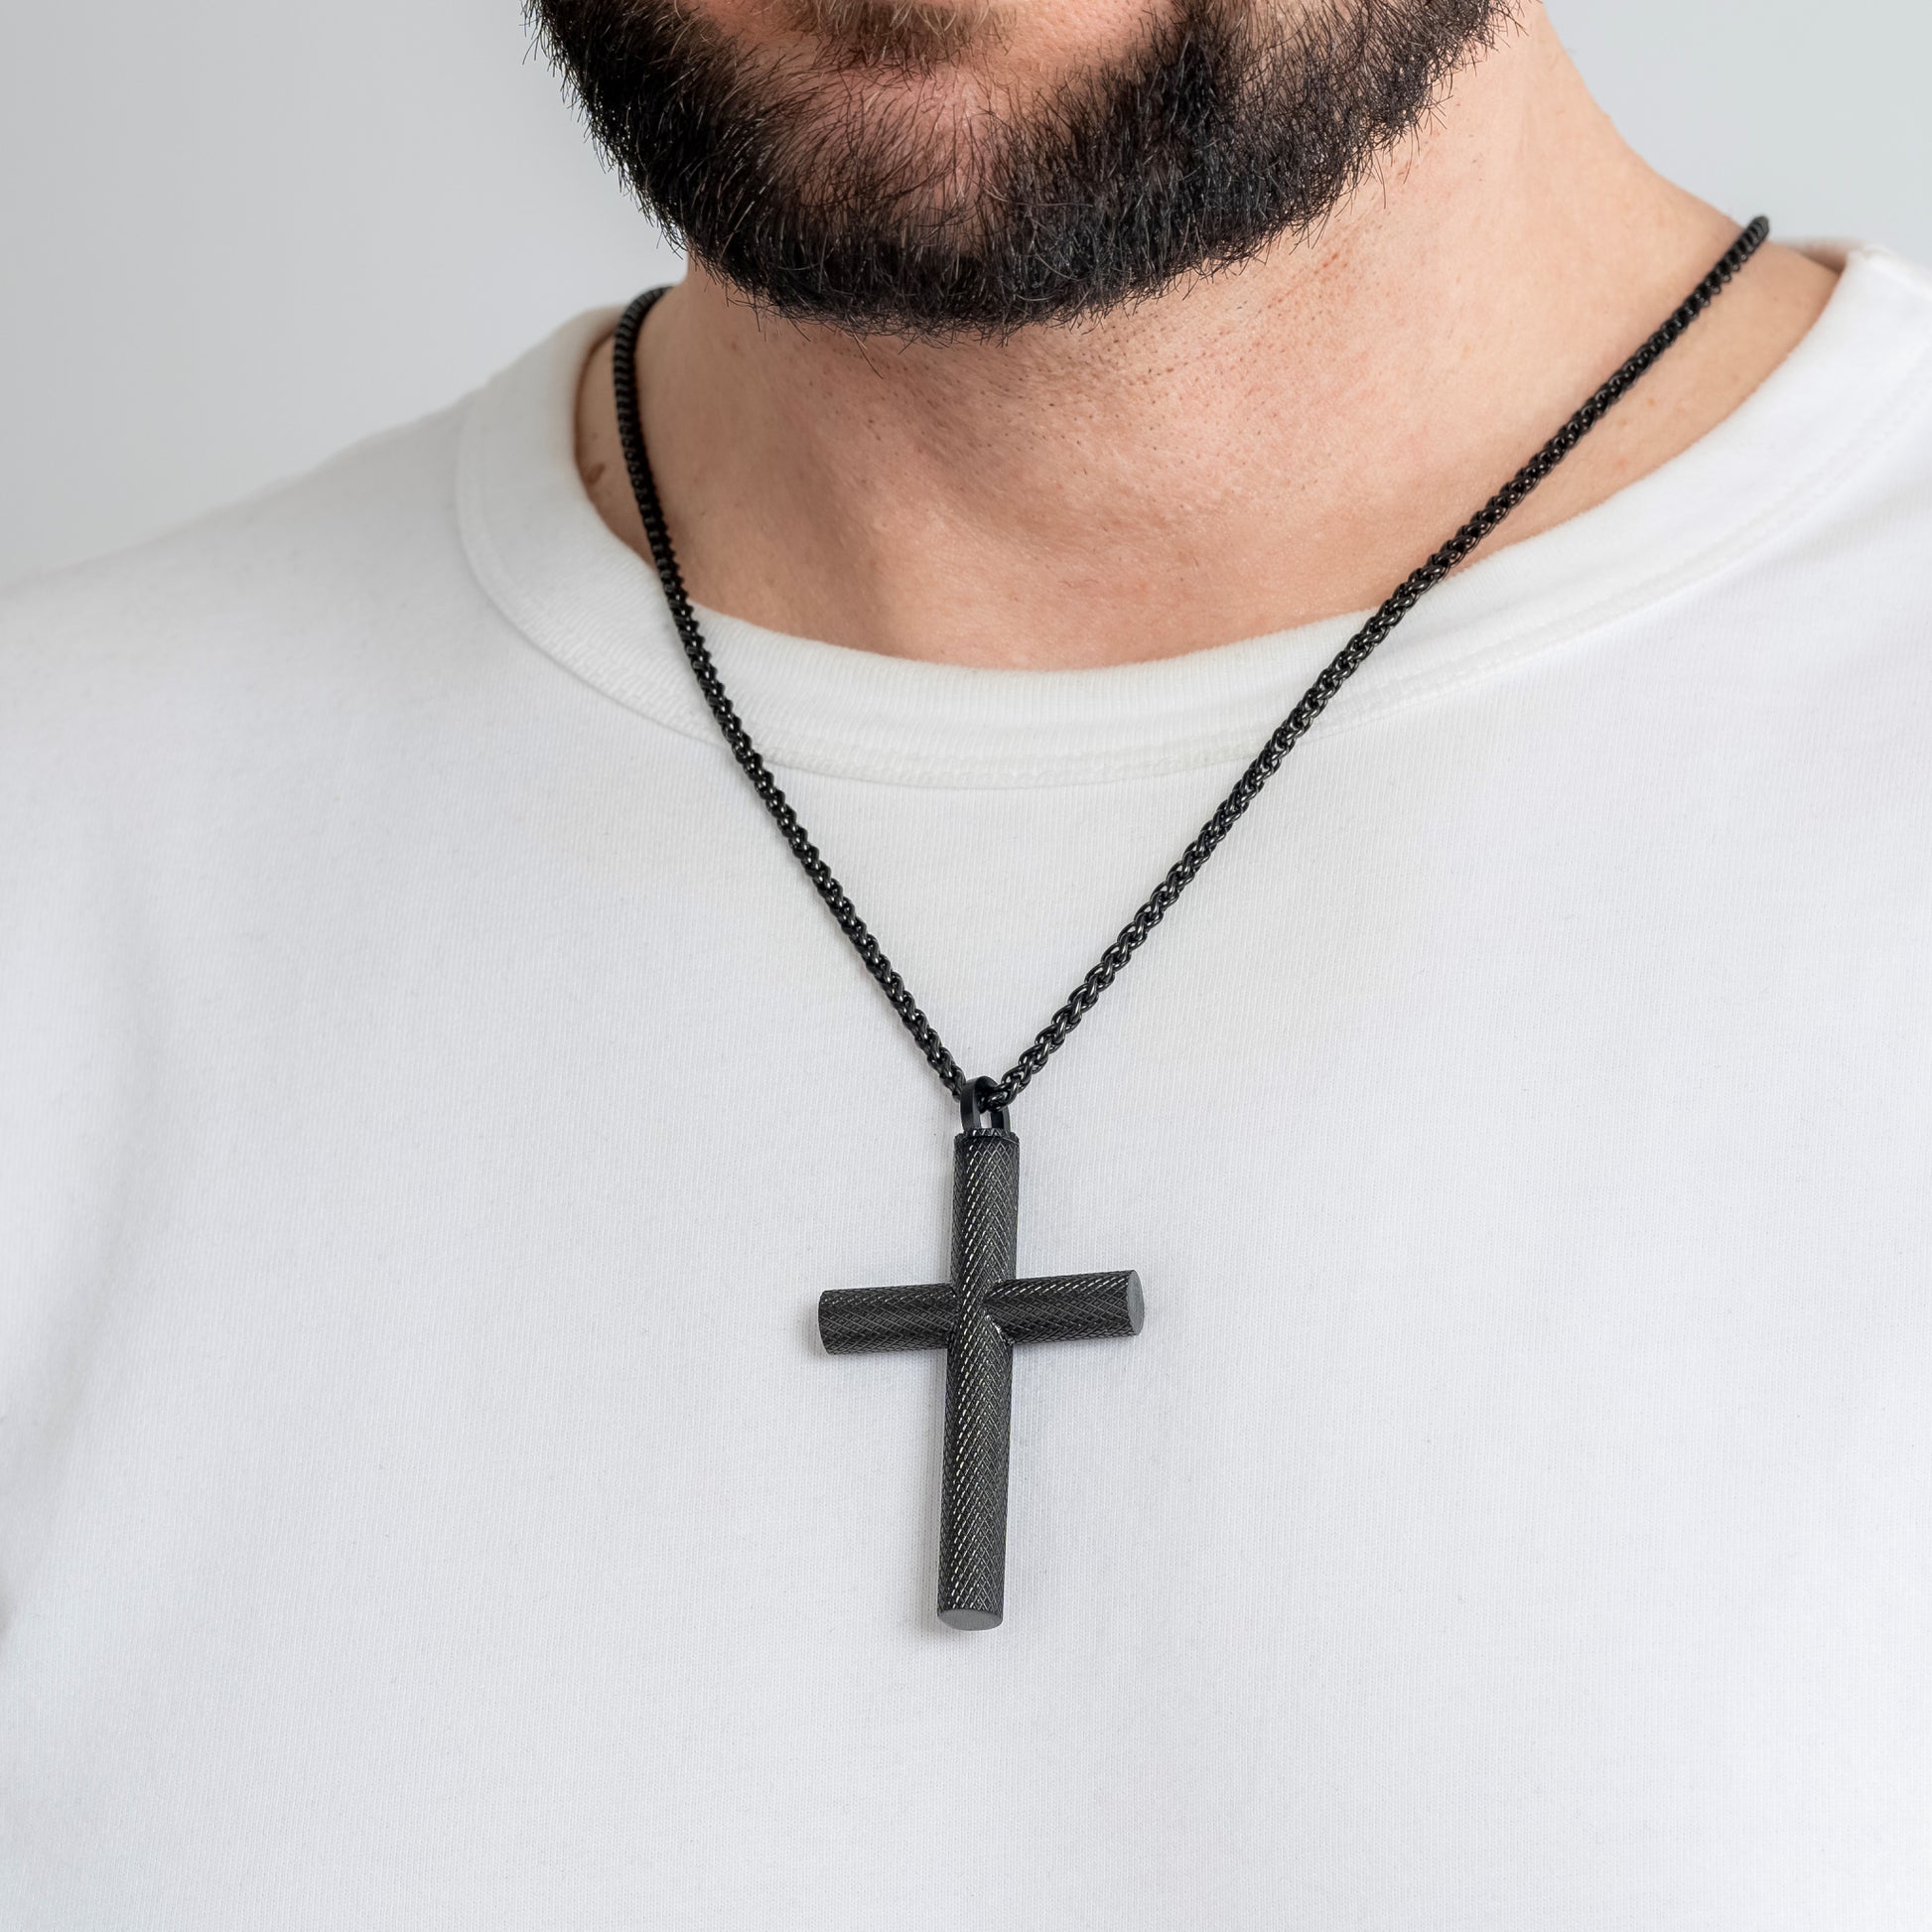 A male model in a white t-shirt wearing a Bison Cross Black Self-fill Pendant with a 3mm Black Spiga chain 24 inches. Close-up image of the non-tarnish trending men's religious necklace.